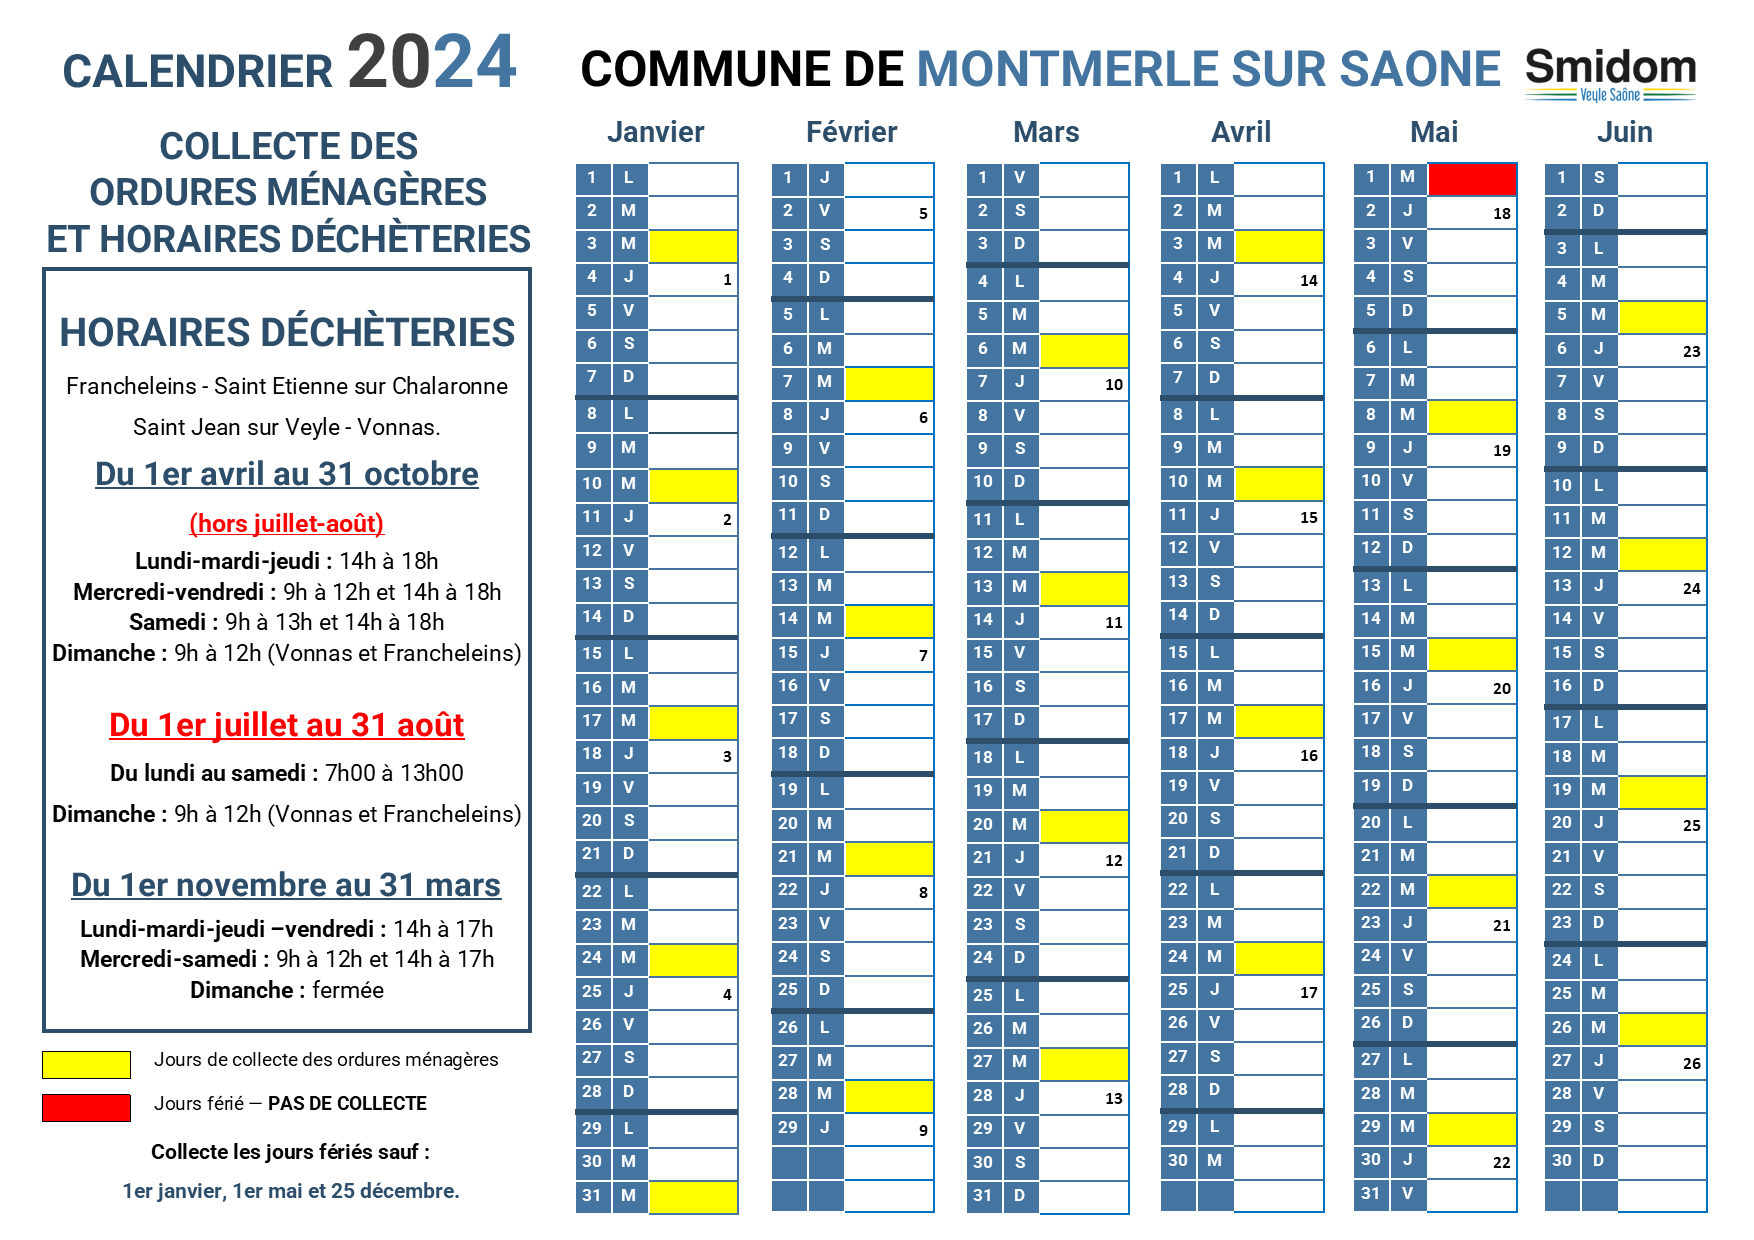 MONTMERLE SUR SAONE - Calendrier 2024.png